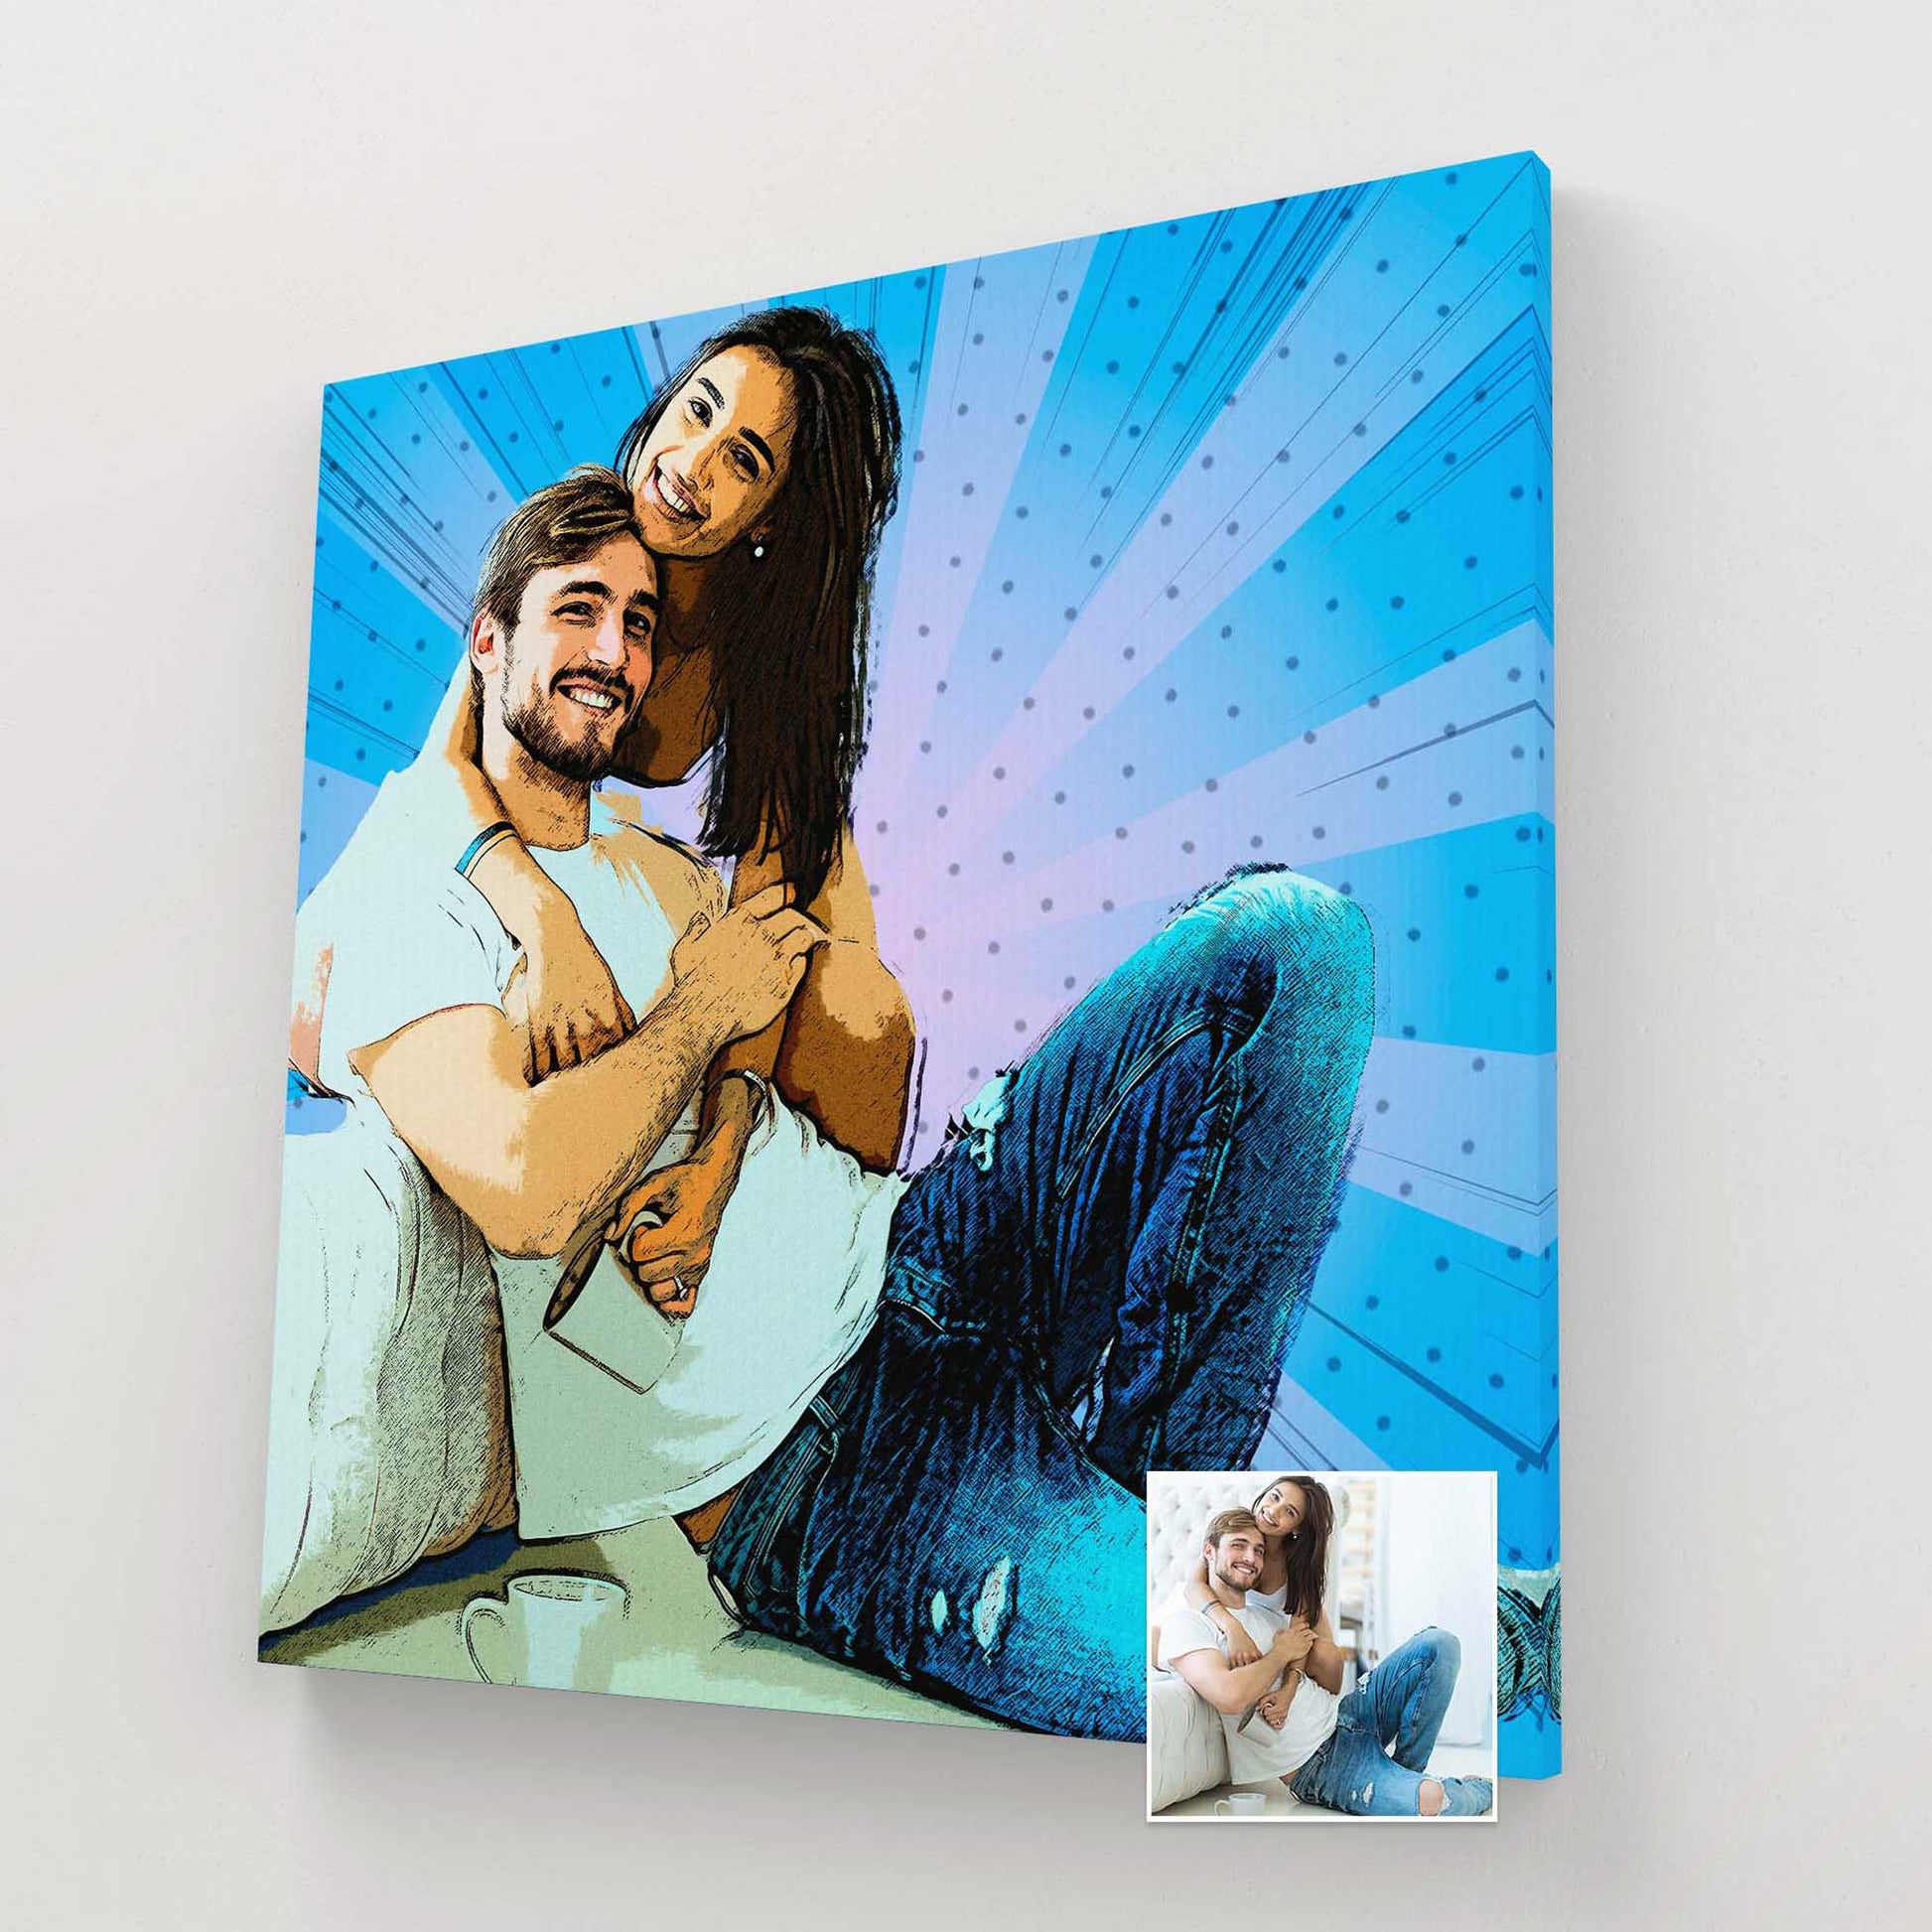 Unleash the retro vibes with our customised Cartoon Comic Canvas. Whether it's a joyous get-together, a milestone graduation celebration, or a treasured family photo, this canvas brings the comic world to your wall